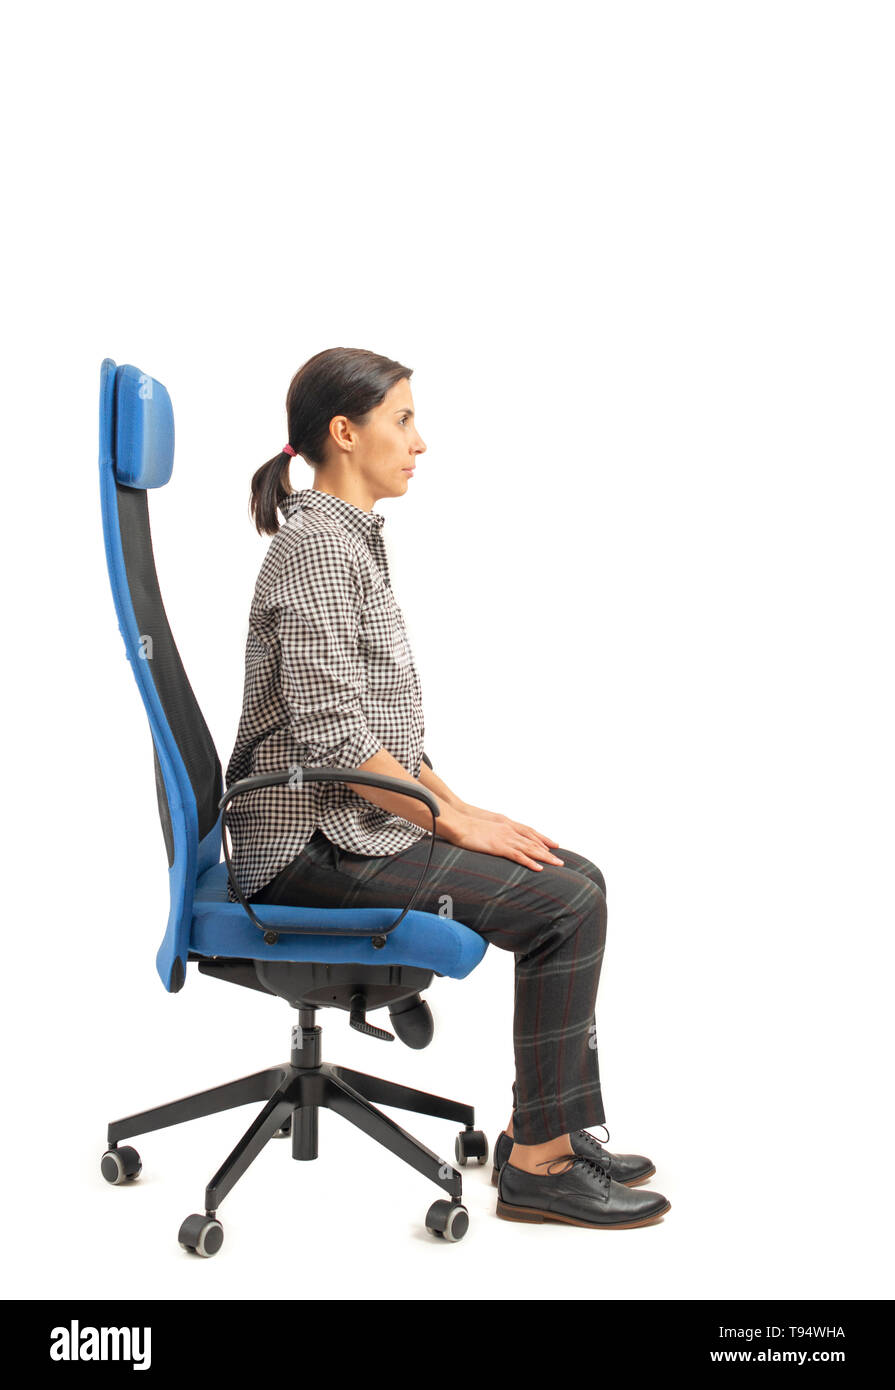 Woman Doing Exercises While Sitting On The Office Chair Isolated